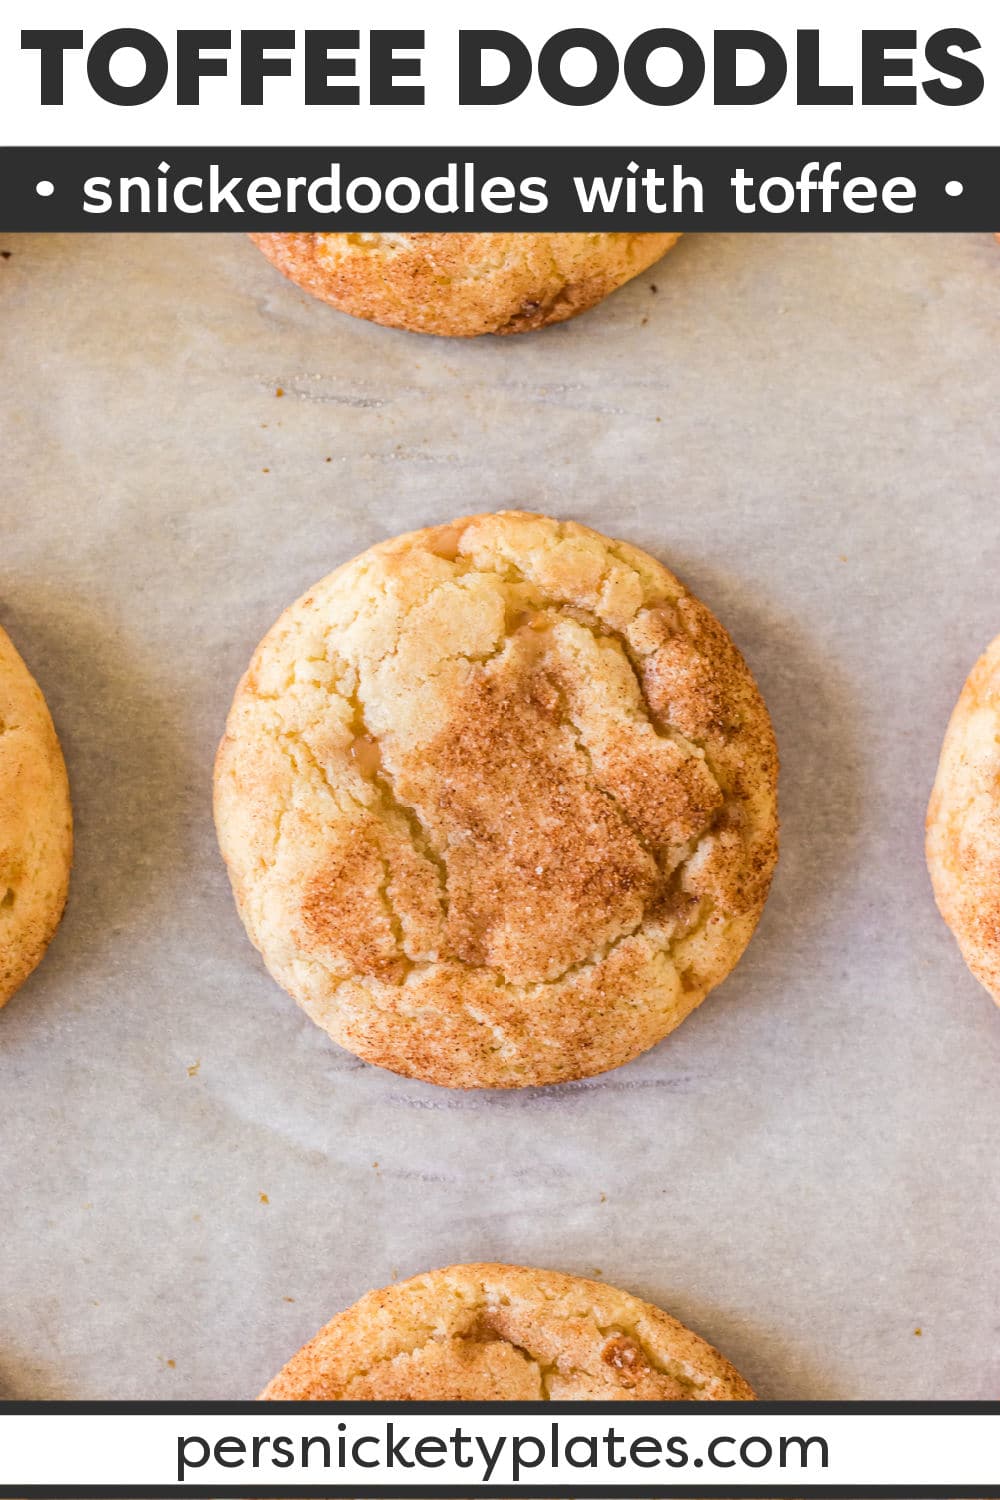 This easy Toffee Doodle cookie recipe takes everything you love about snickerdoodles up a notch by filling them with toffee bits! They are soft, chewy, and rolled in just the right amount of cinnamon and sugar. | www.persnicketyplates.com